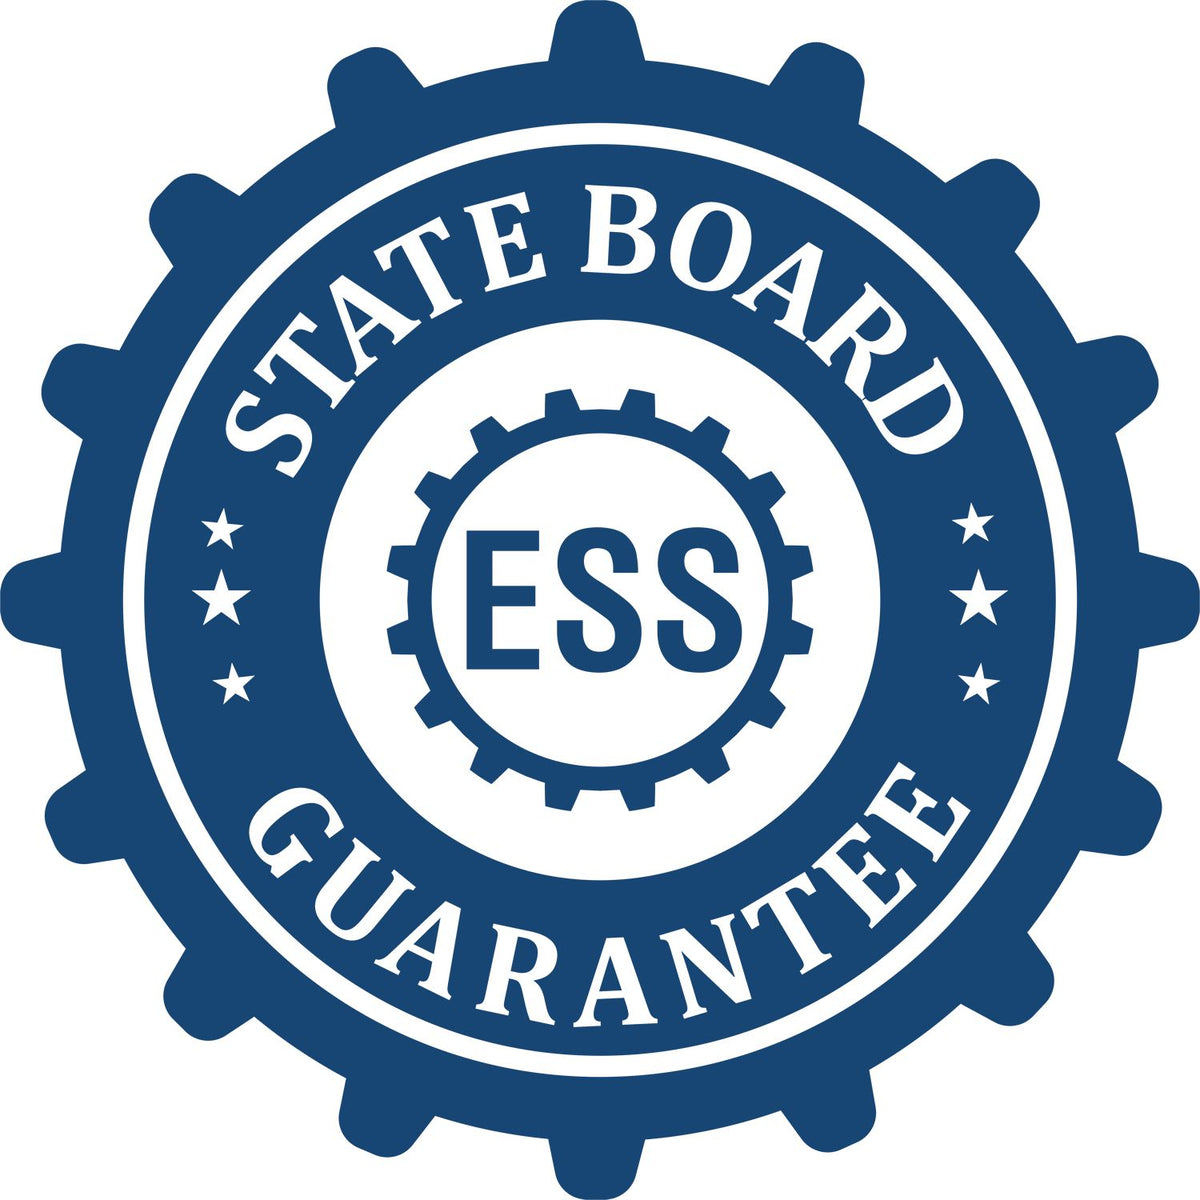 An emblem in a gear shape illustrating a state board guarantee for the Soft Texas Professional Engineer Seal product.